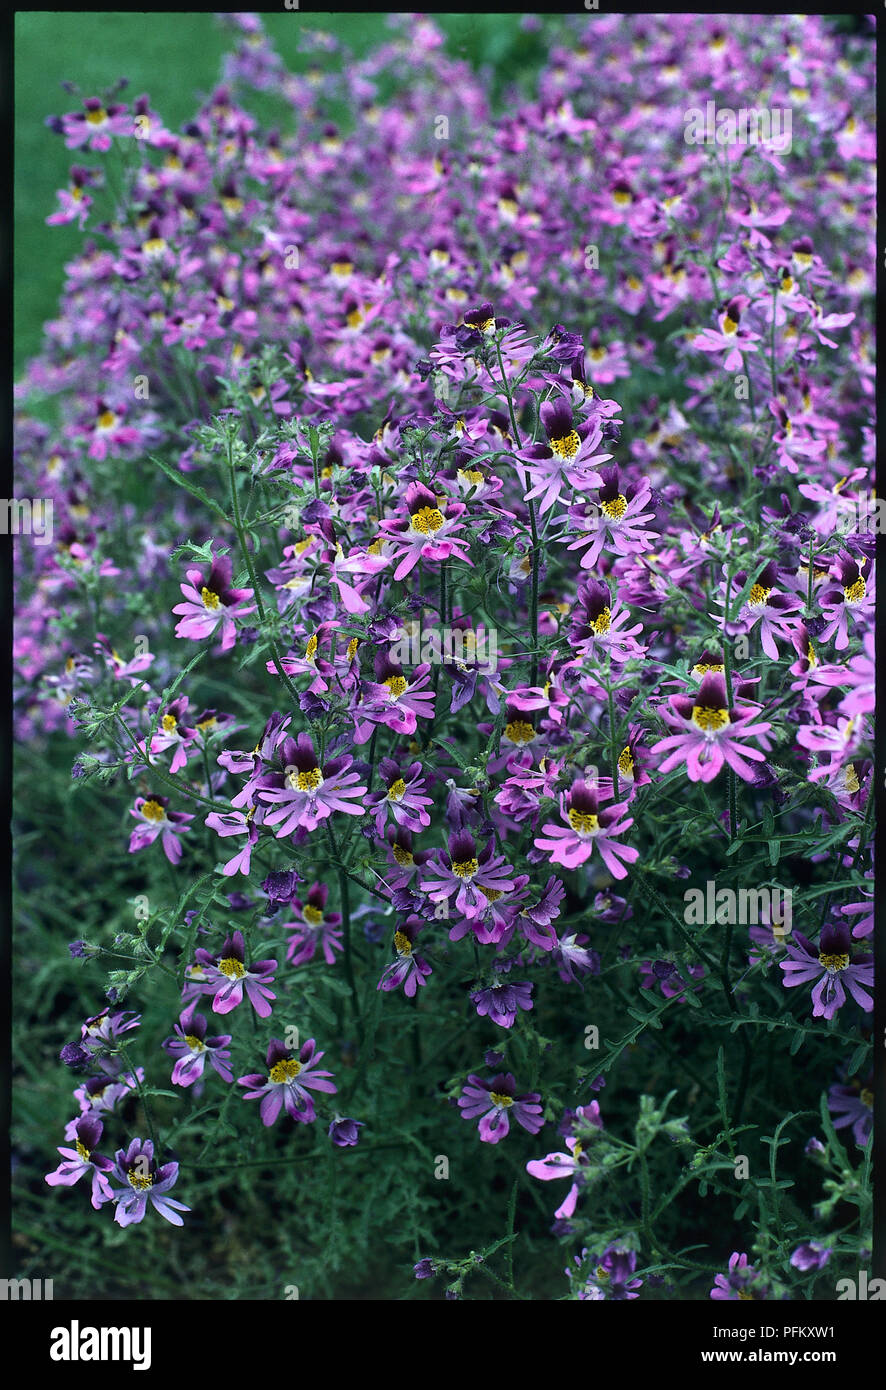 Schizanthus pinnatus, a moderately fast-growing, upright, bushy annual with feathery, light green leaves and rounded, lobed, multicoloured flowers in shades of pink, purple, or white-yellow. Stock Photo